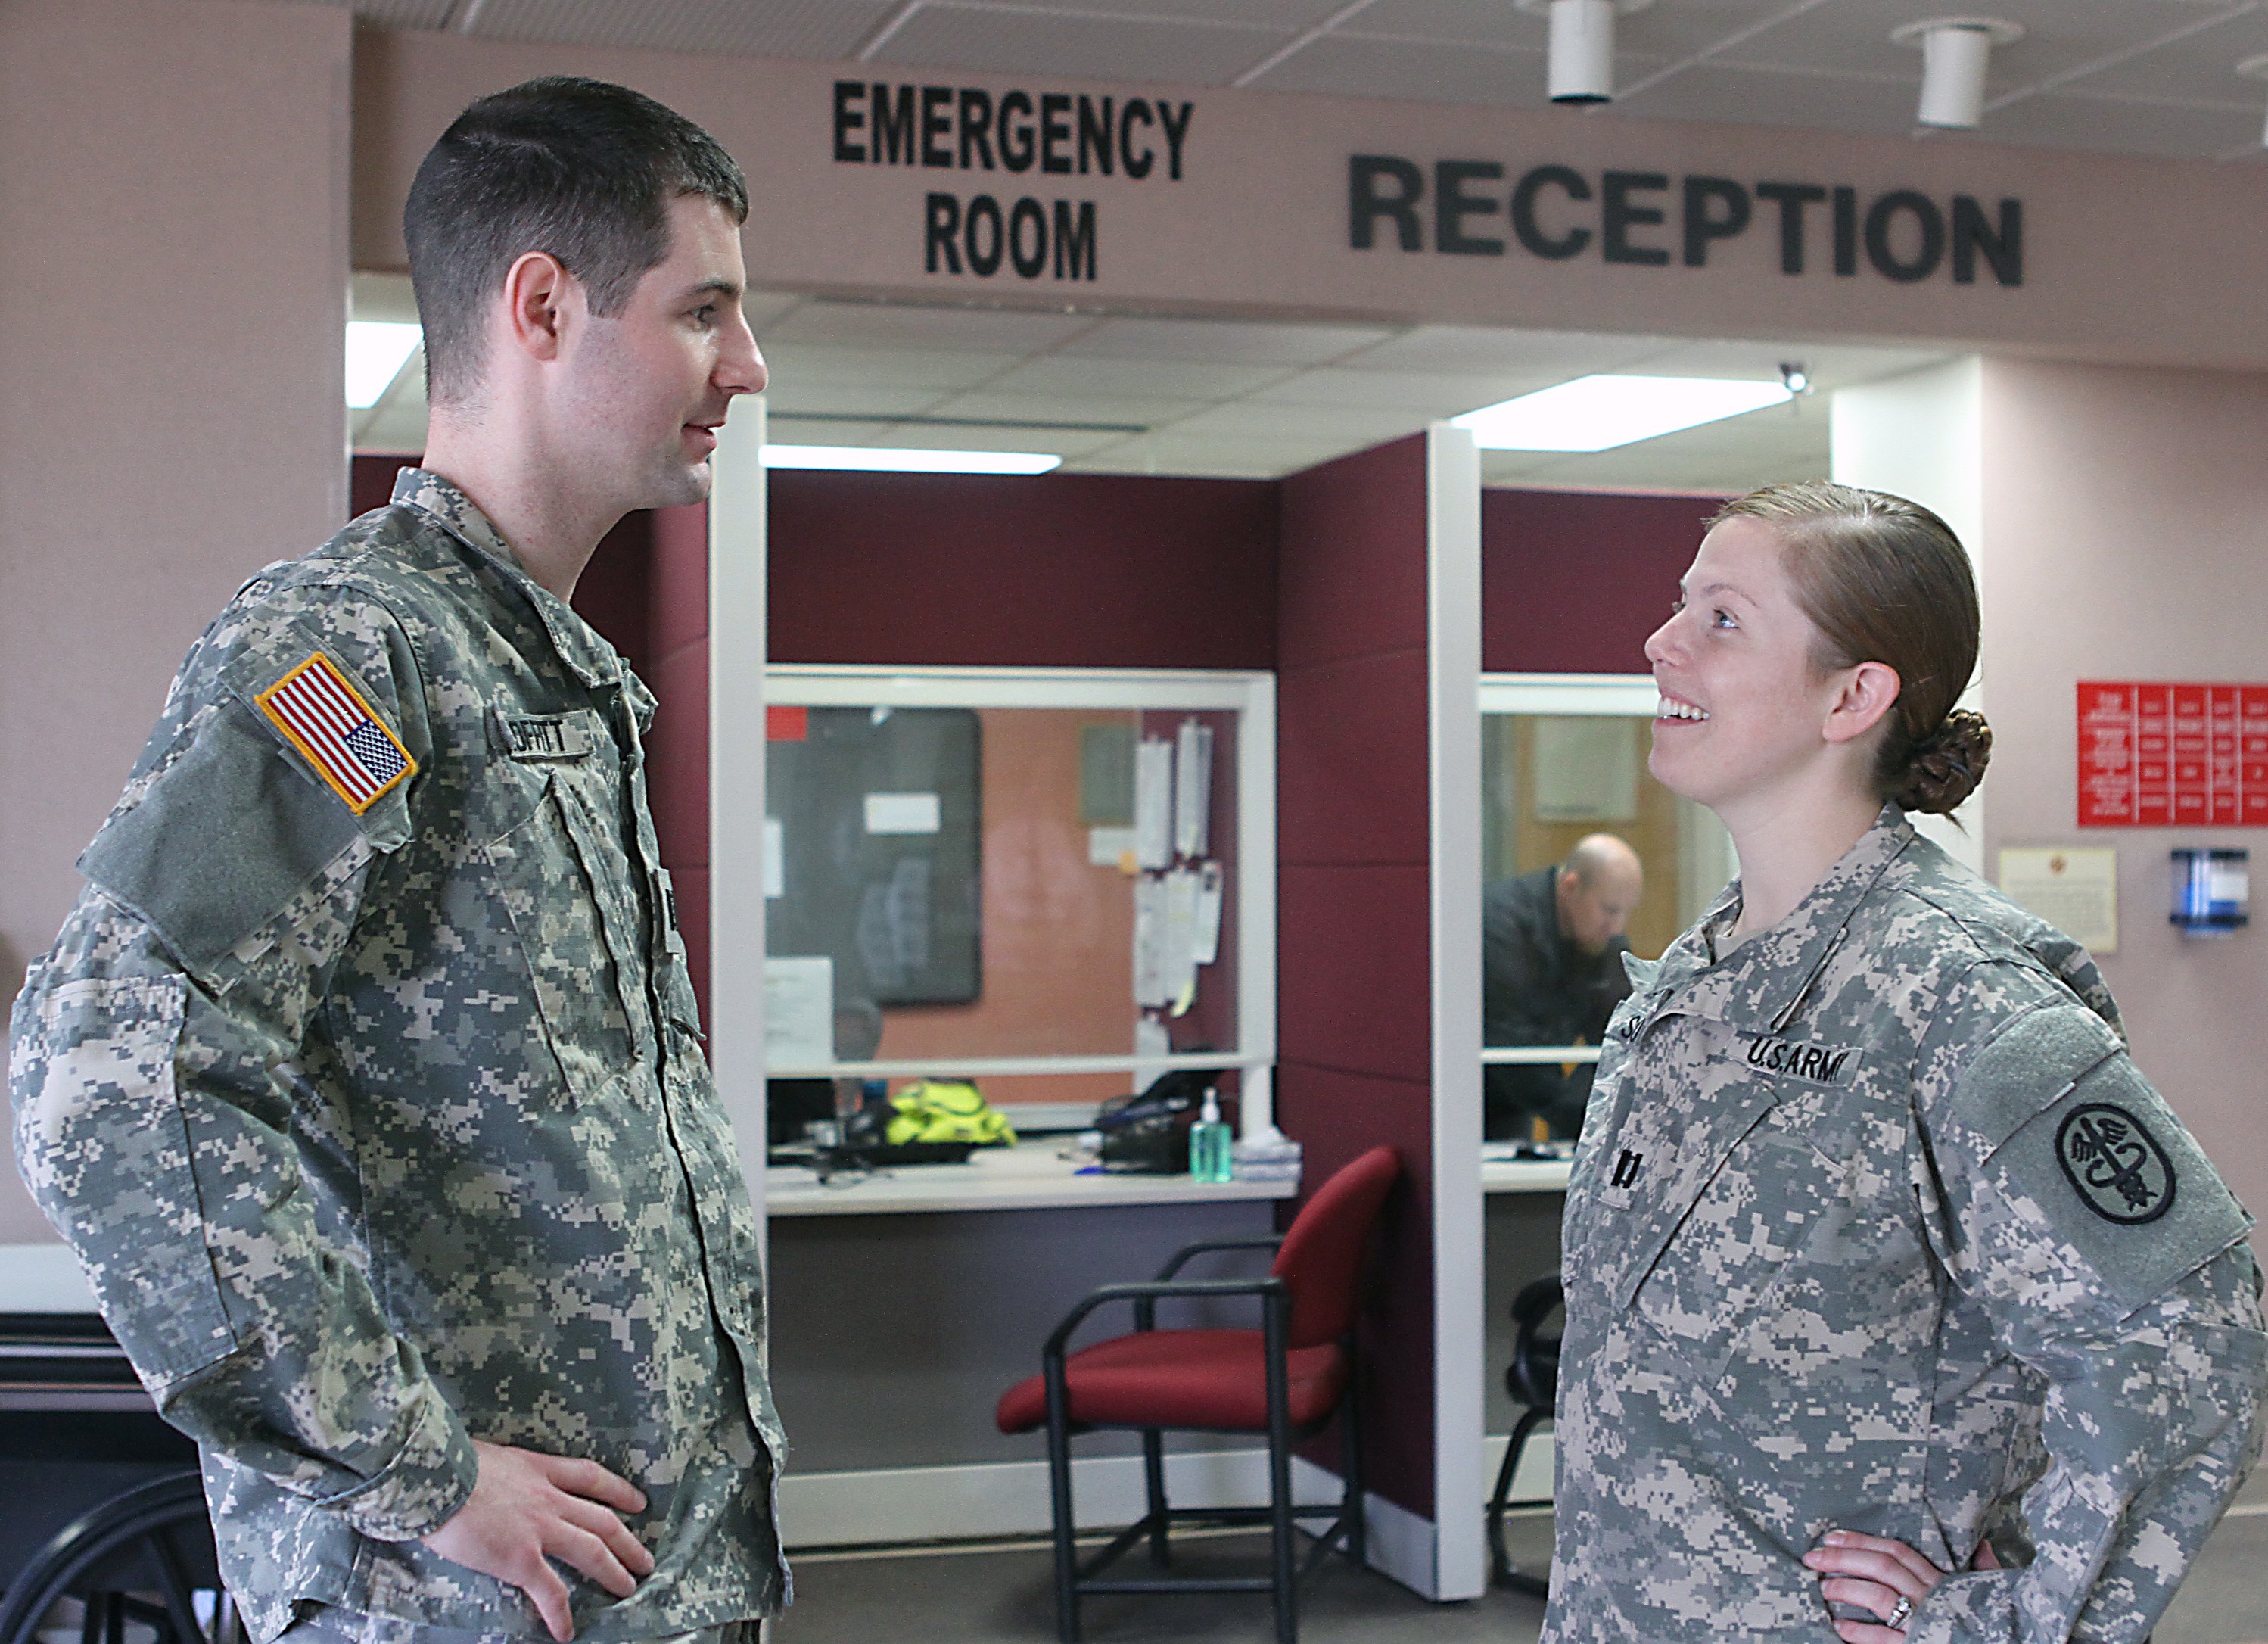 Emergency room transitions to urgent care center at Reynolds Army